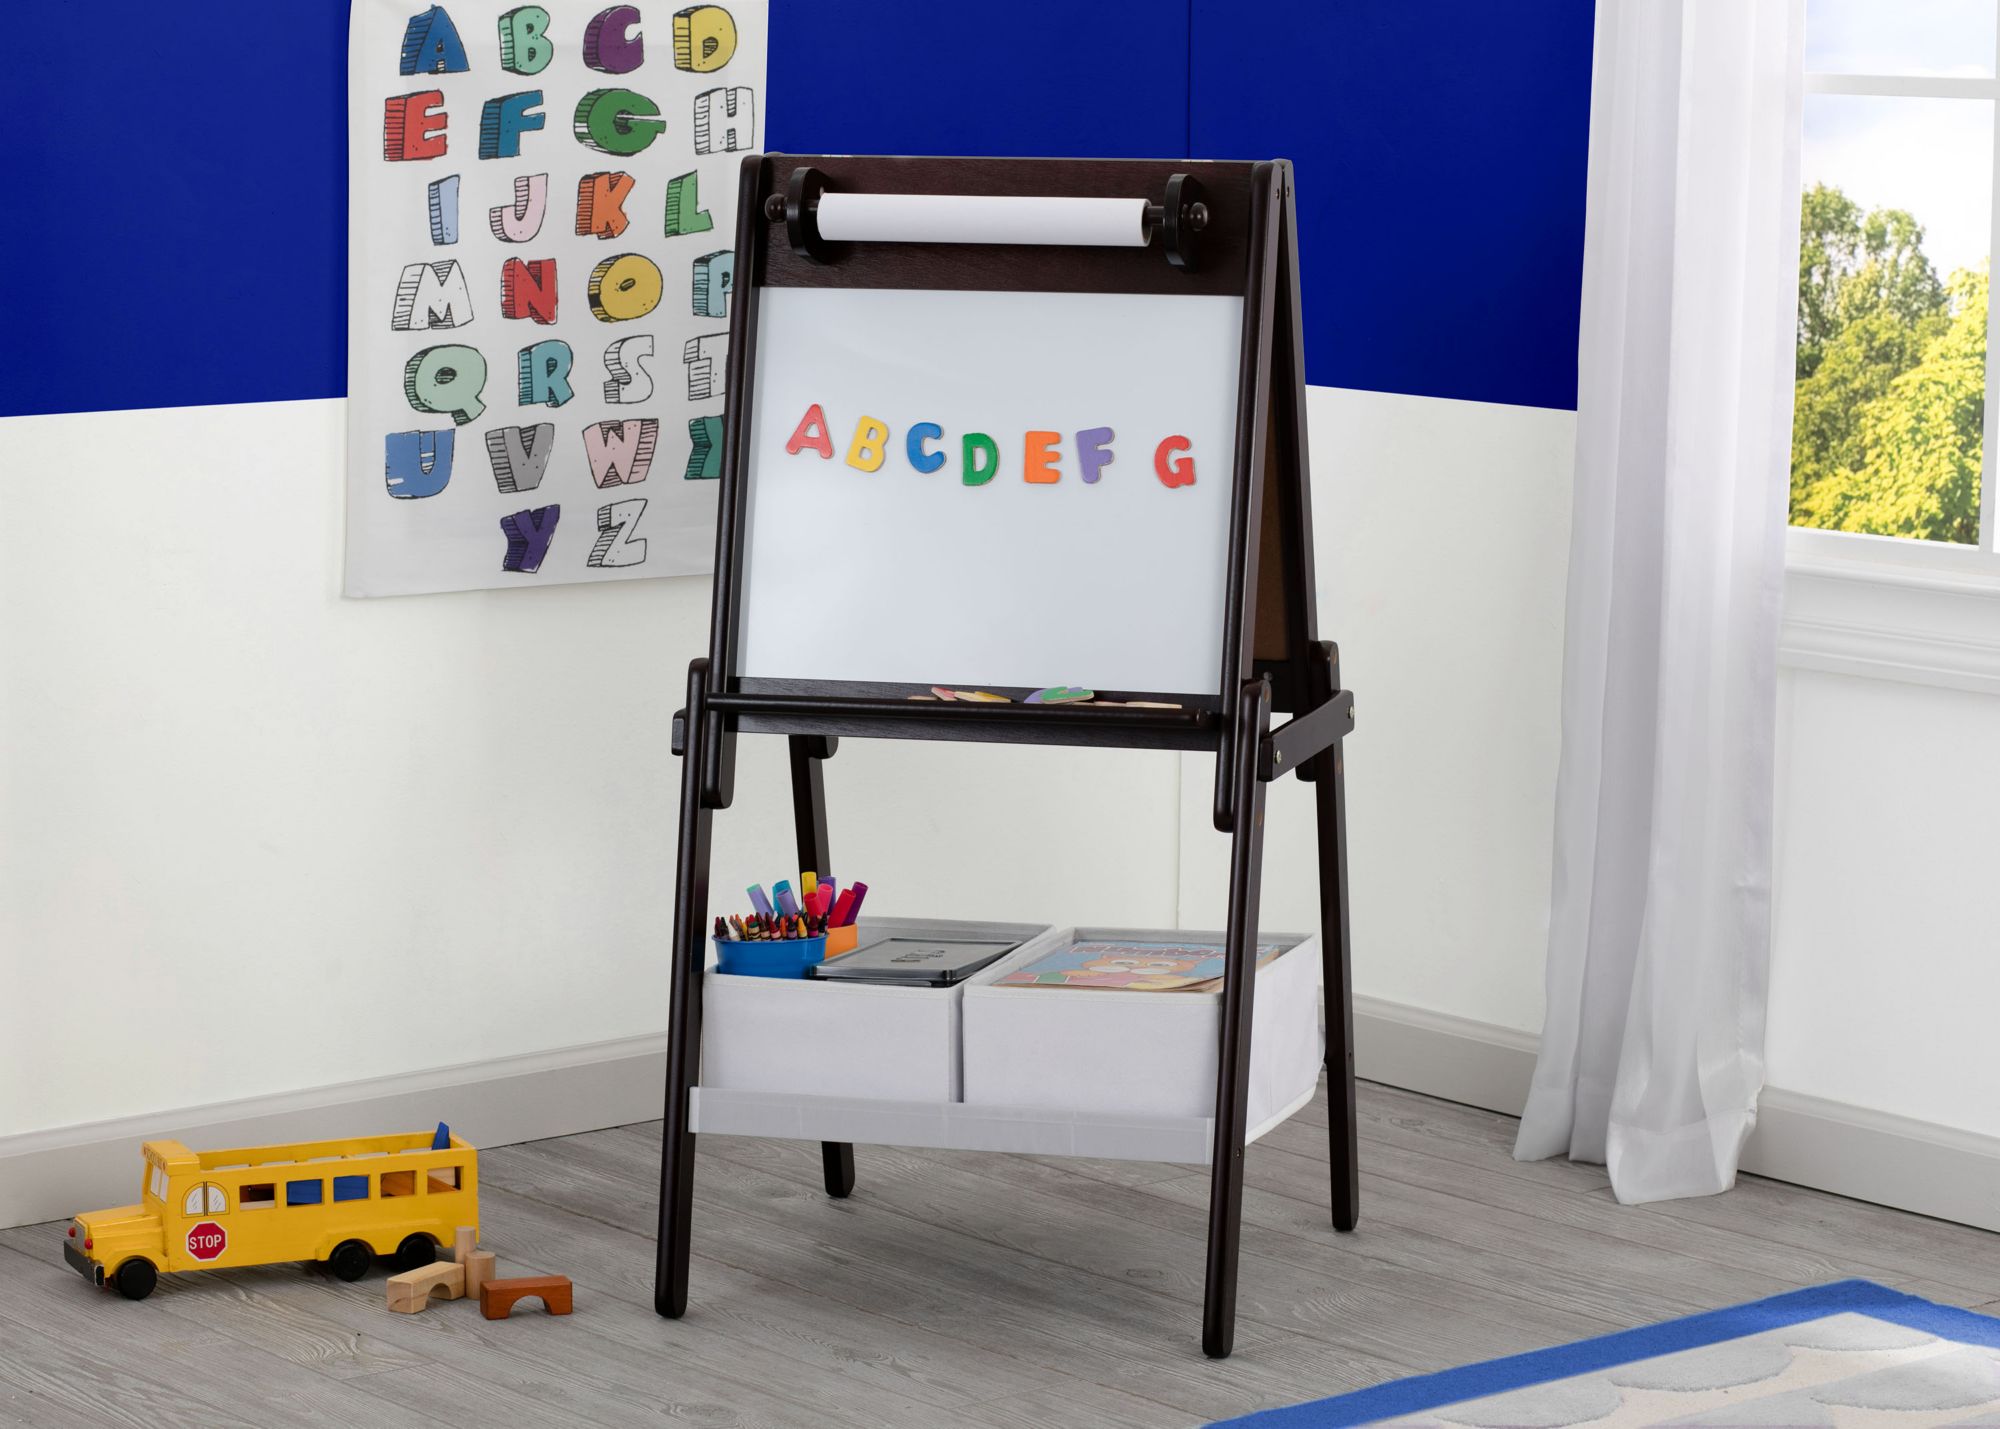 Flip-Over Double-Sided Kids Art Easel with Paper Roll Storage Bins